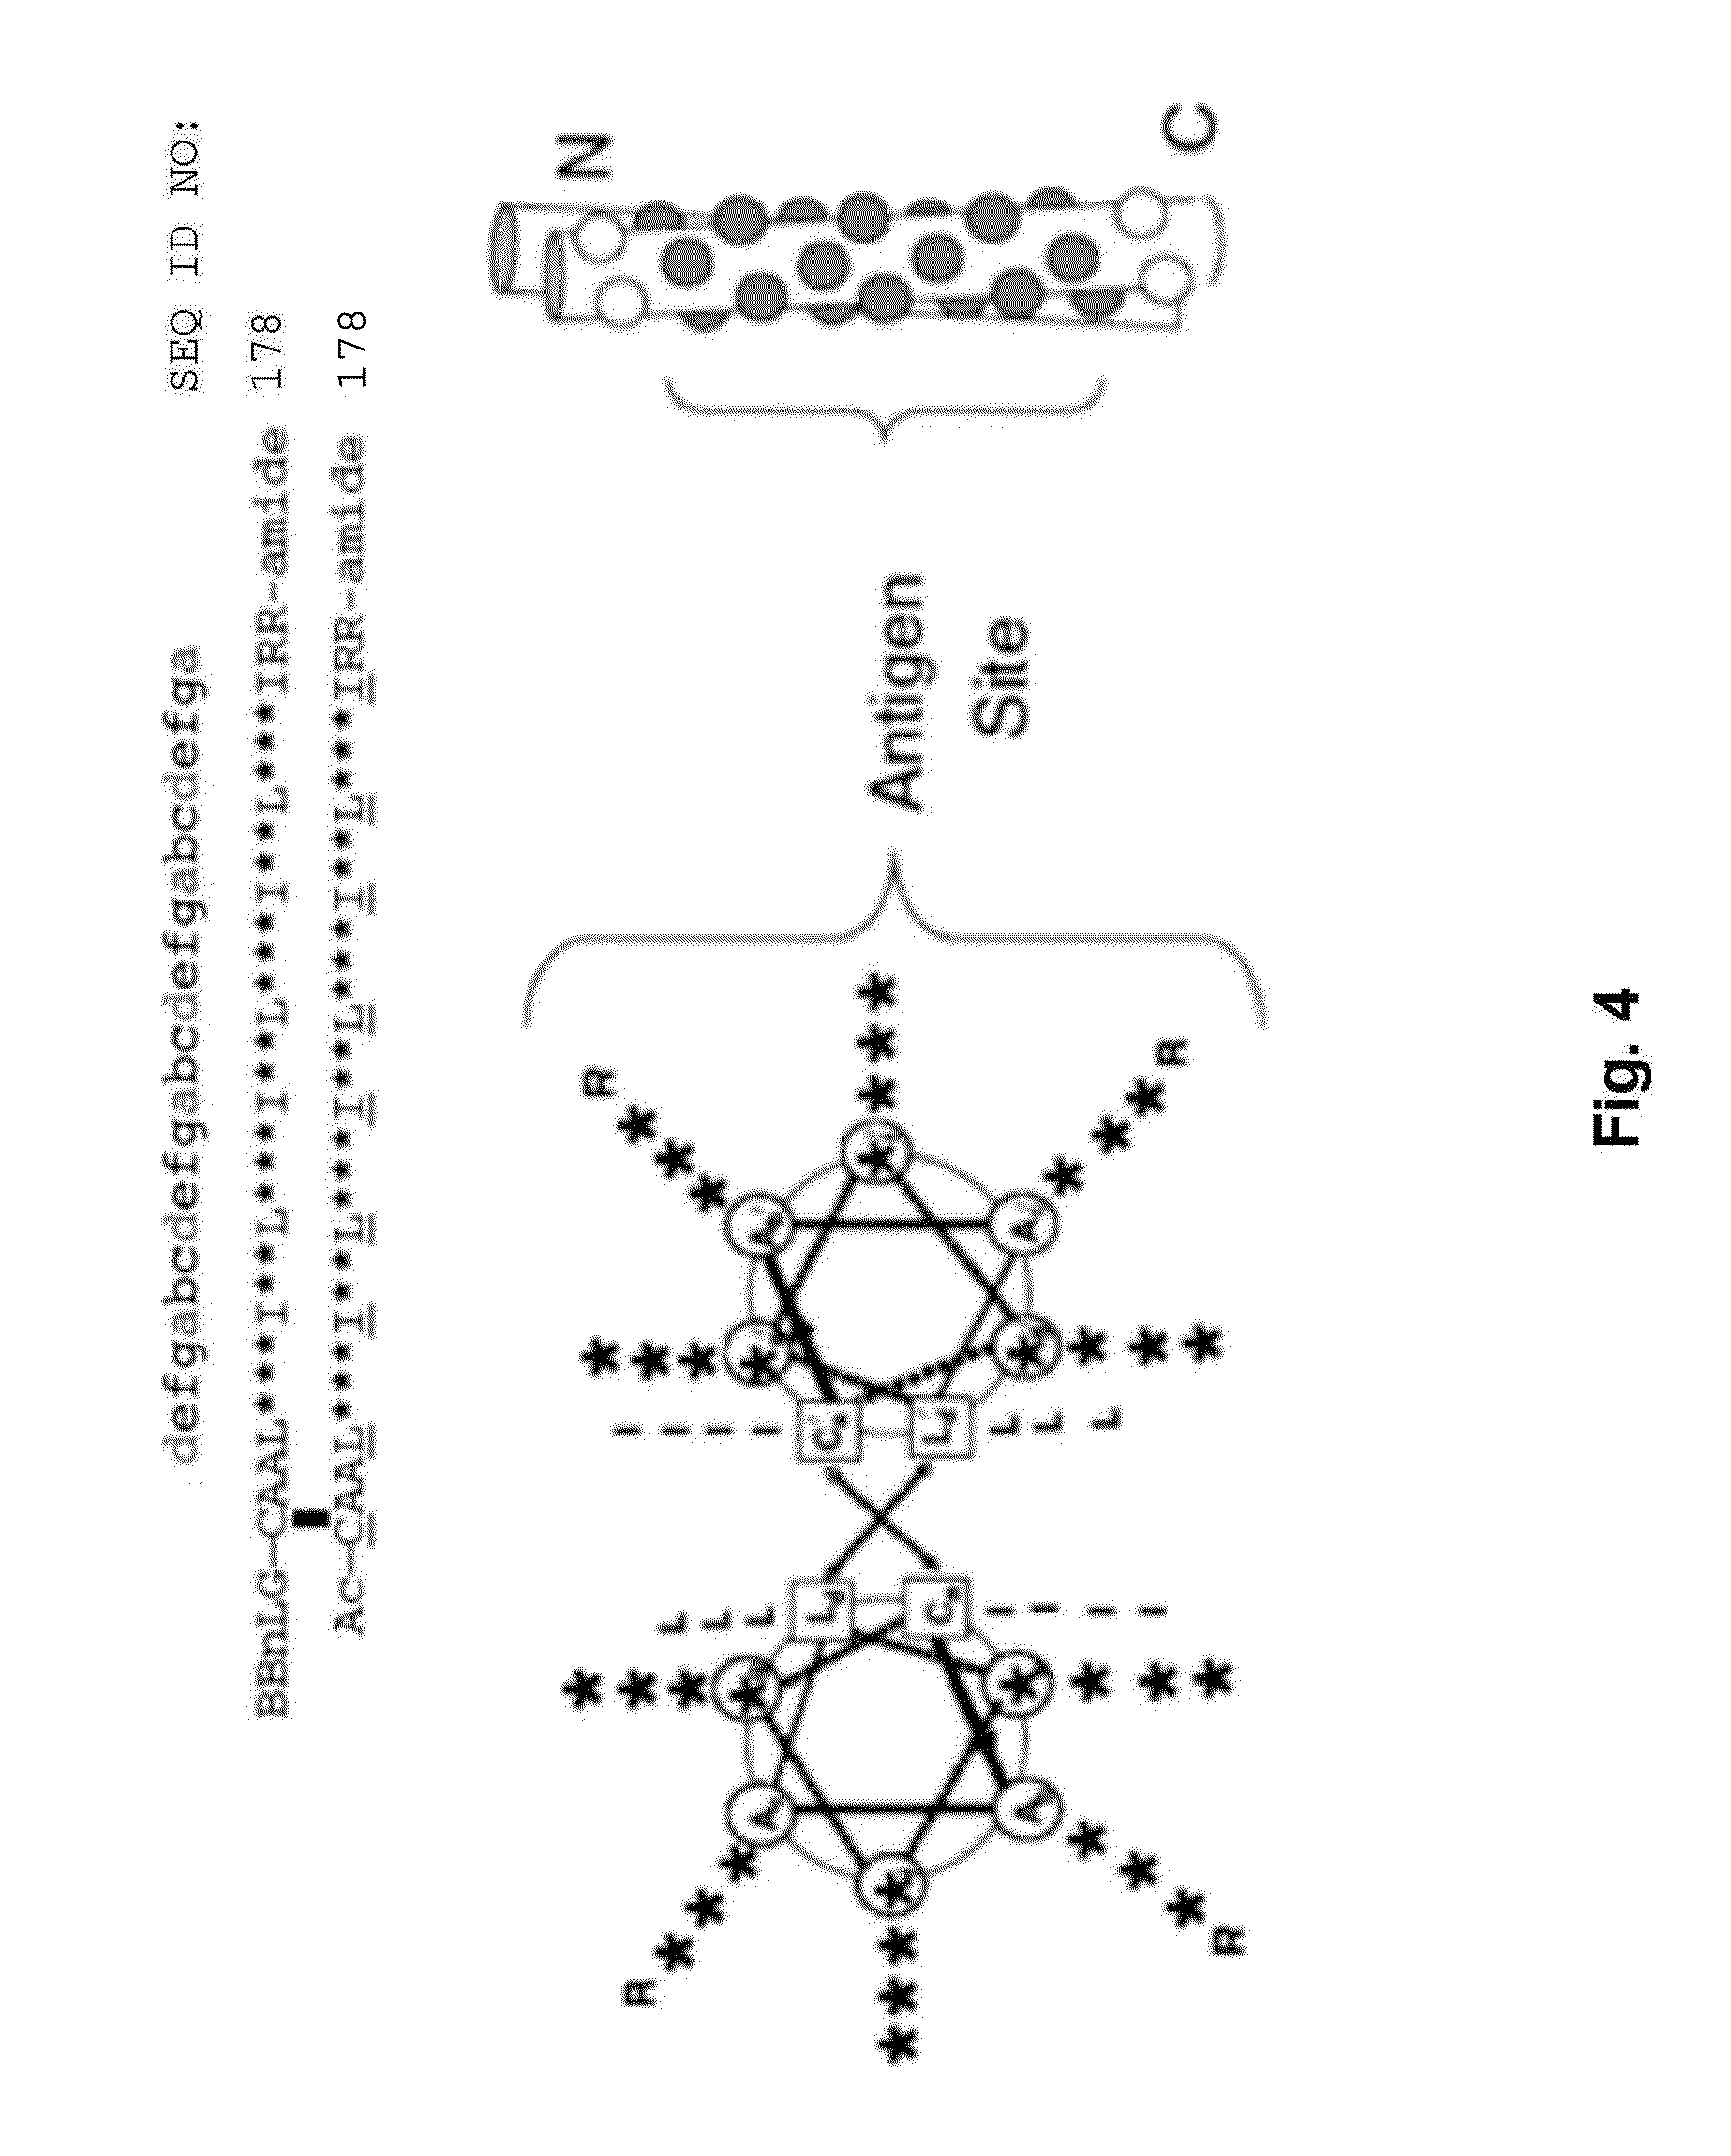 Influenza virus compositions and methods for universal vaccines